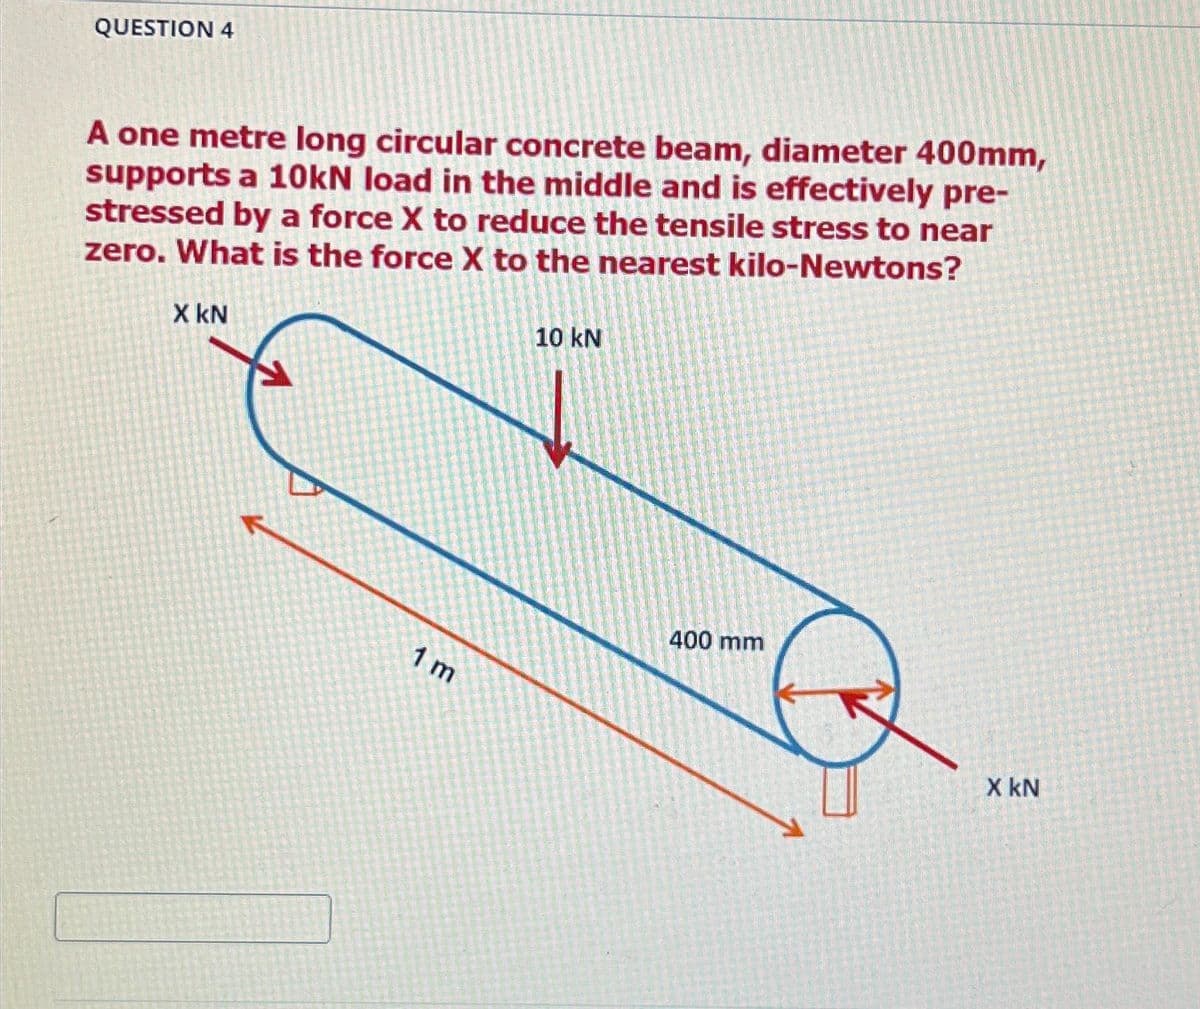 QUESTION 4
A one metre long circular concrete beam, diameter 400mm,
supports a 10kN load in the middle and is effectively pre-
stressed by a force X to reduce the tensile stress to near
zero. What is the force X to the nearest kilo-Newtons?
X KN
1 m
10 kN
400 mm
X KN